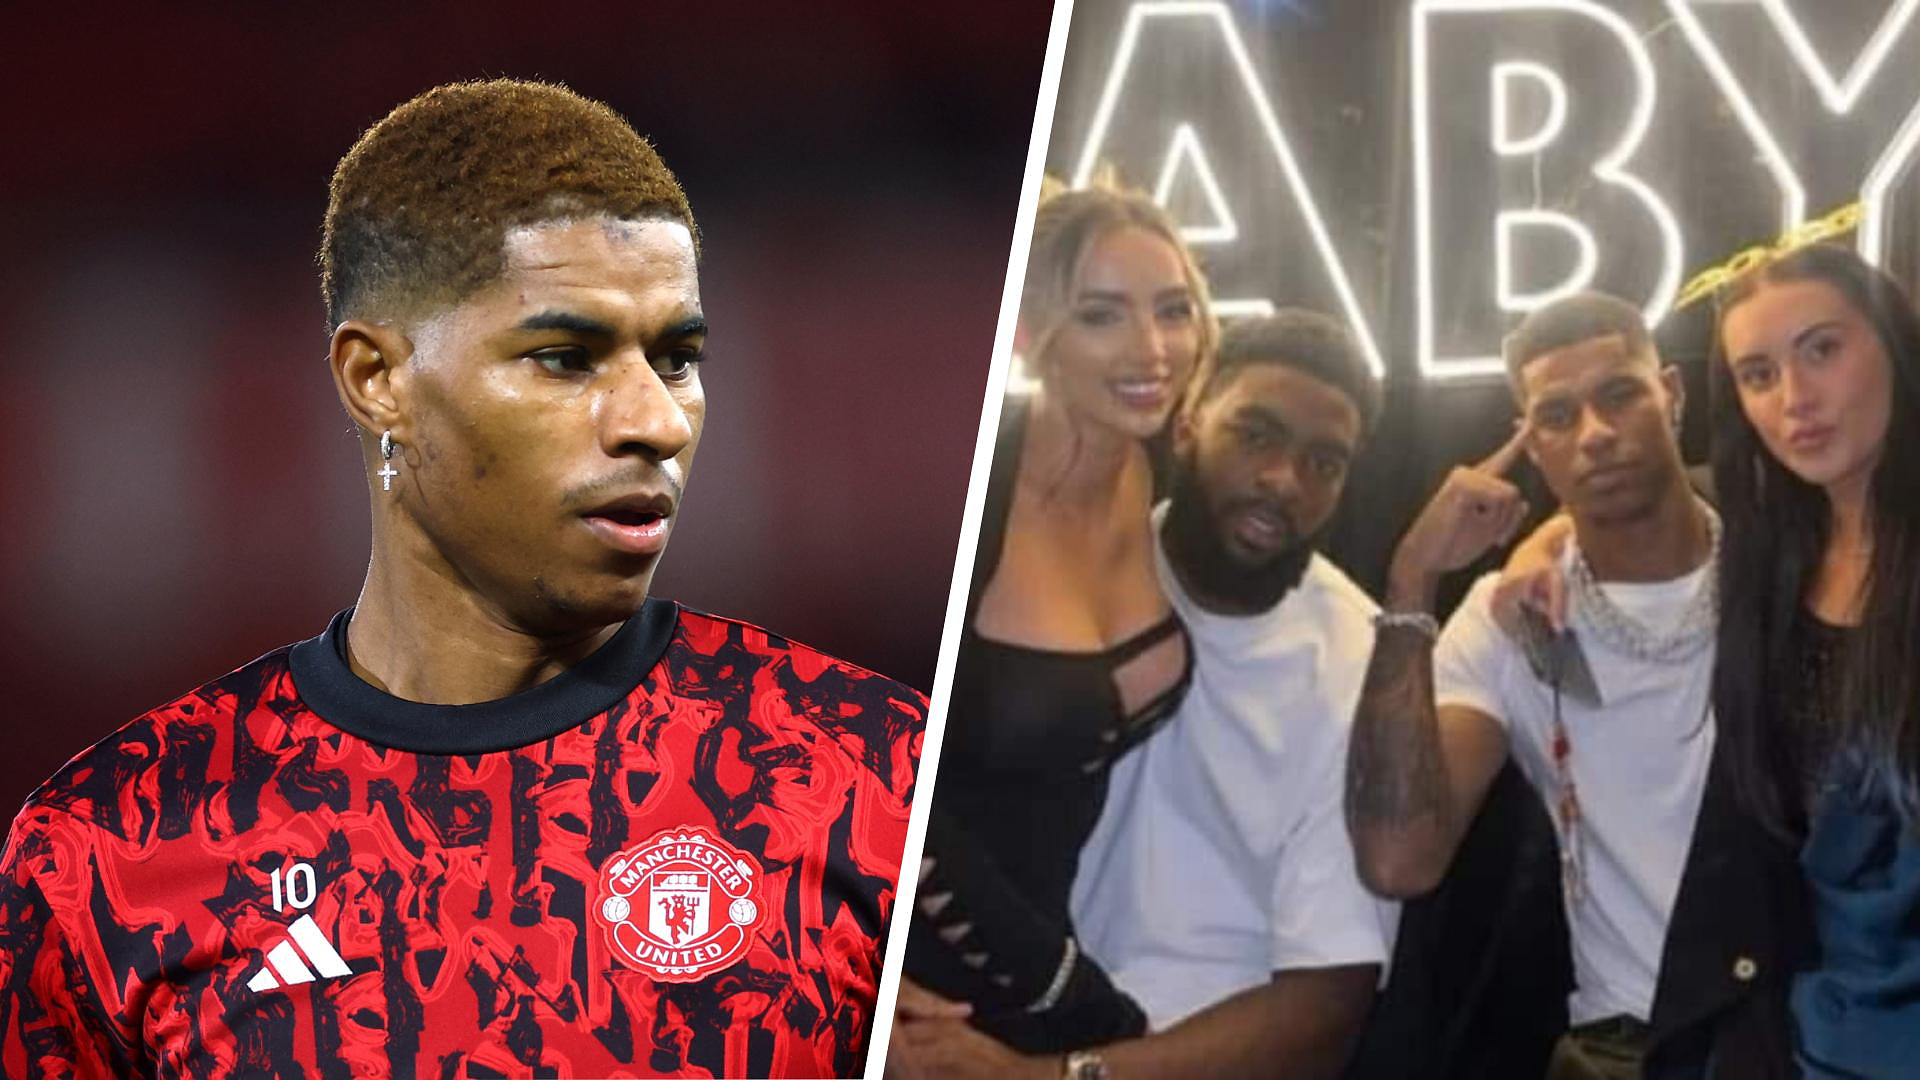 Football: seen in a nightclub and absent from training, Rashford risks a fine